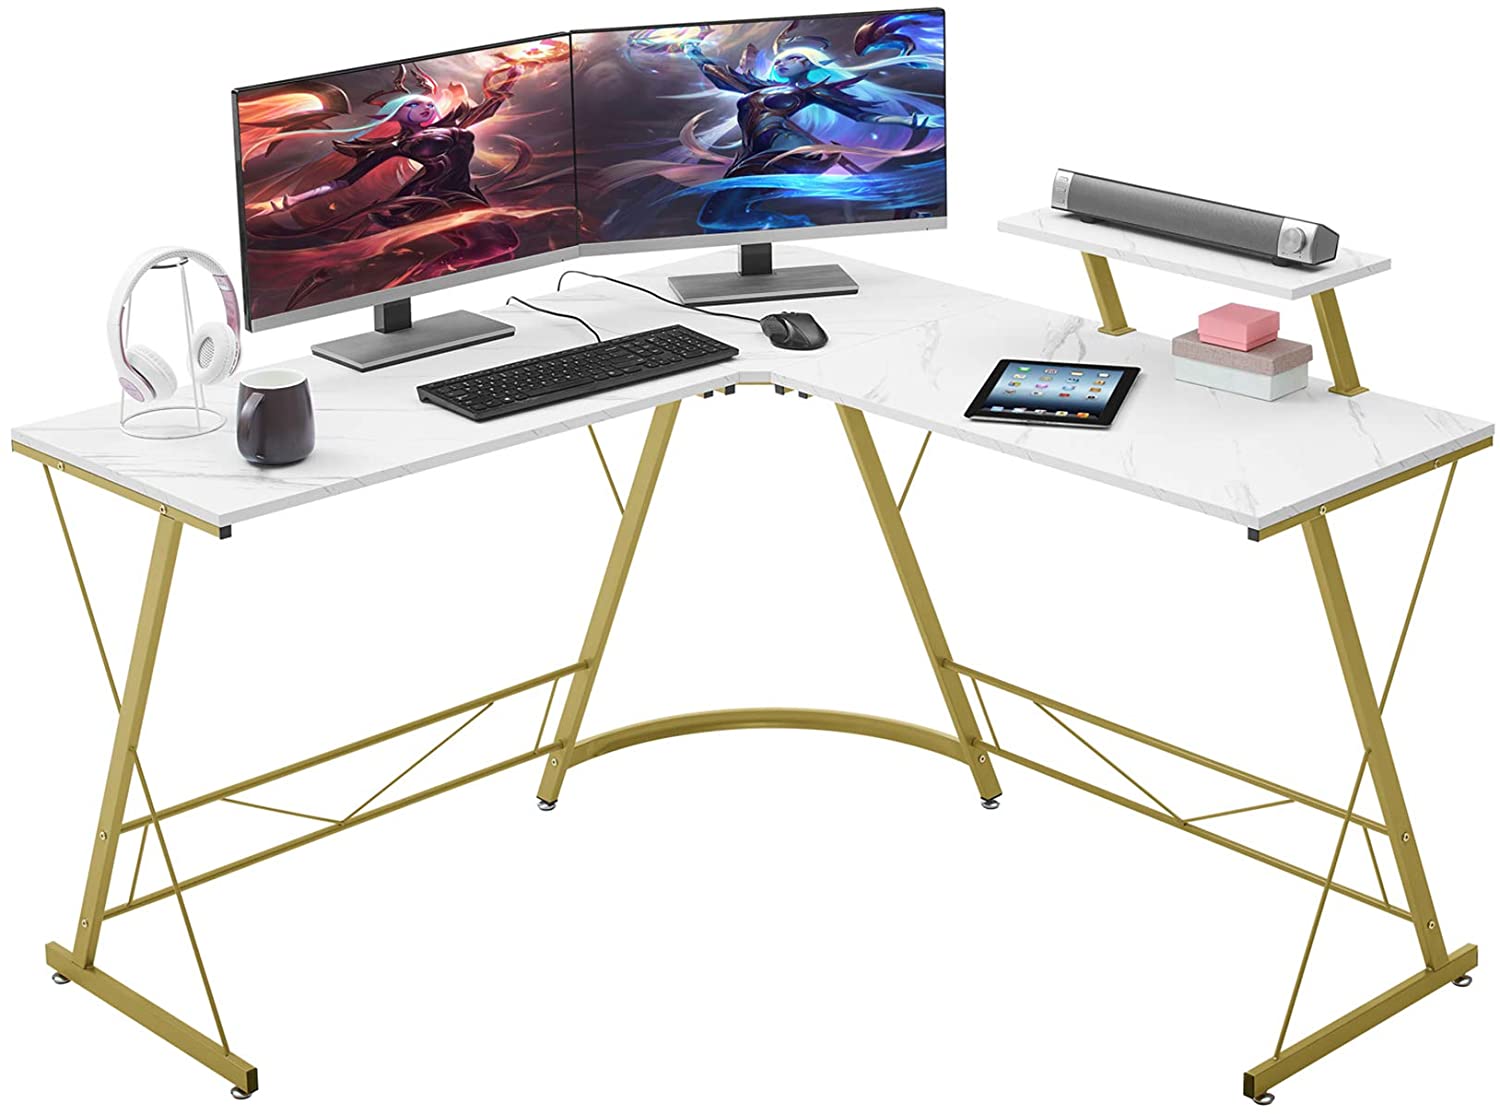  Large Desk For Two Monitors with RGB